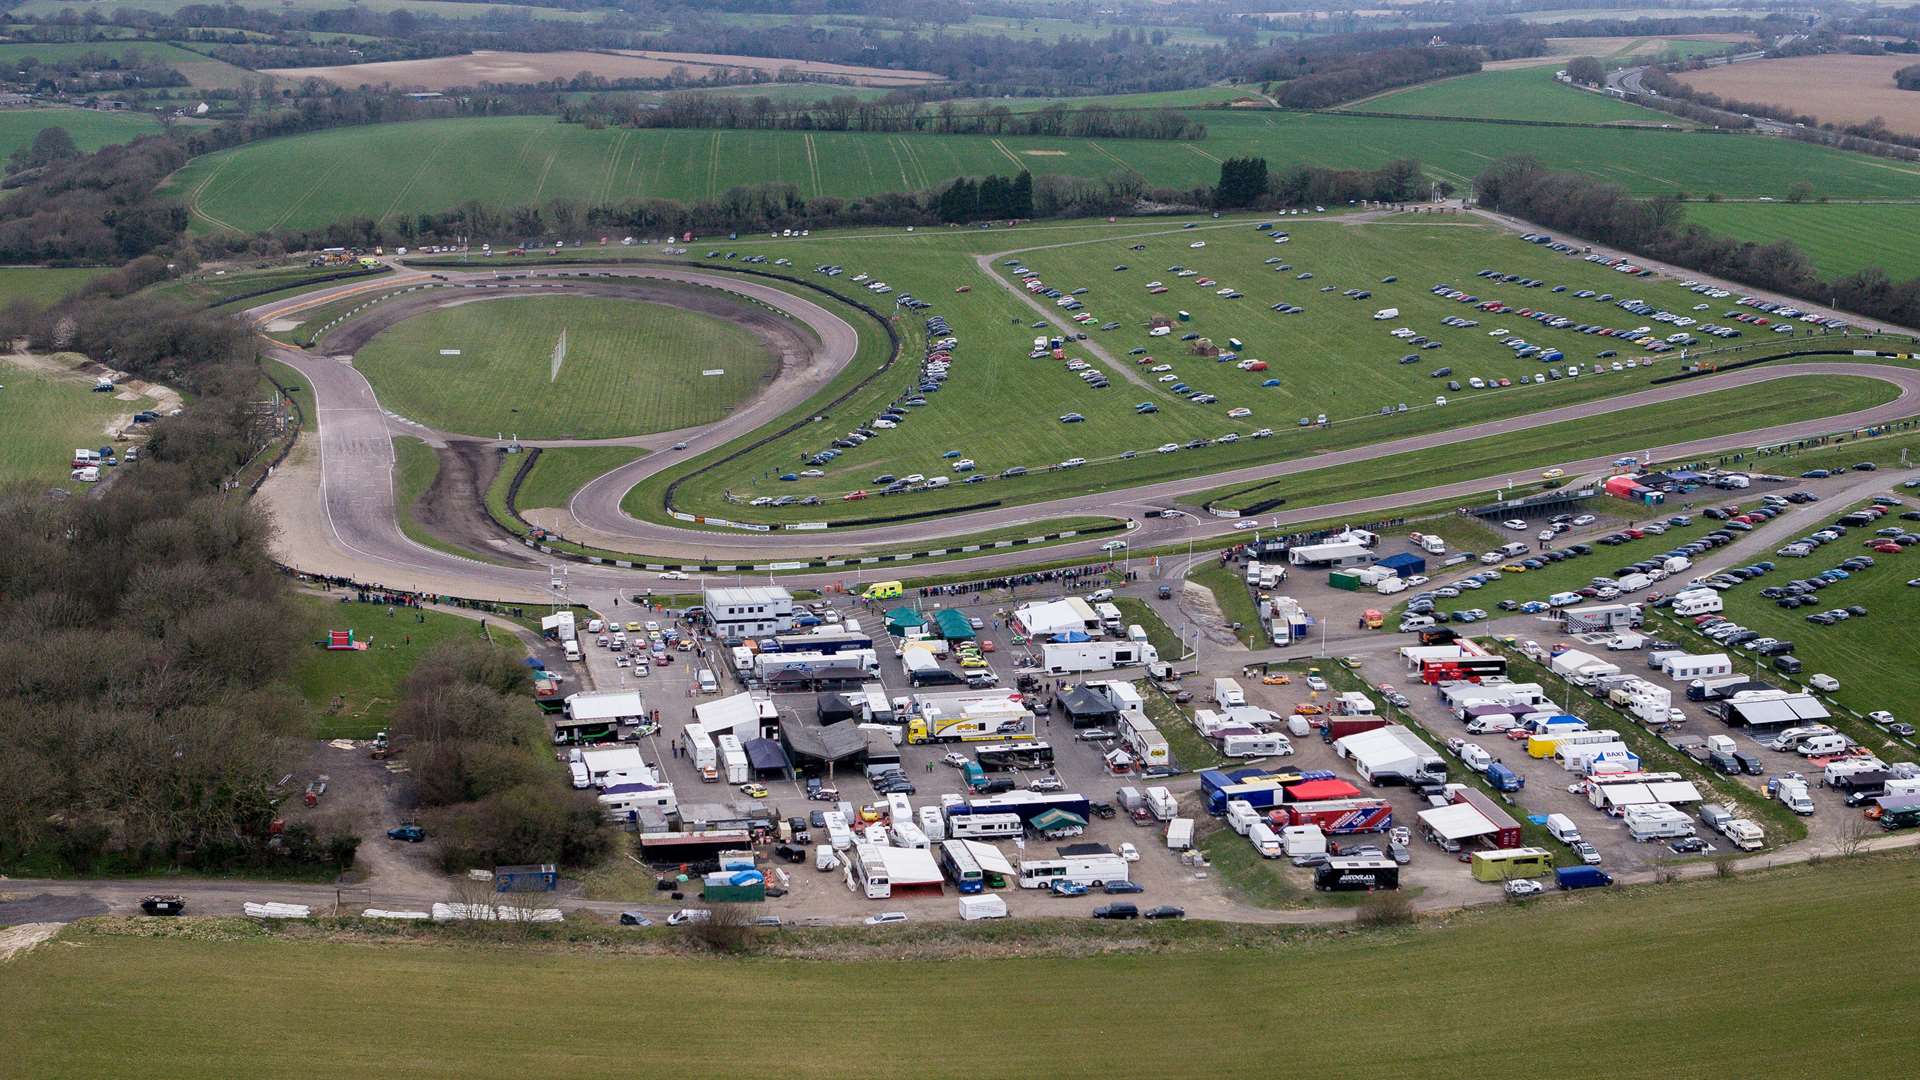 The paddock will be busy with more than 70 competitors entered